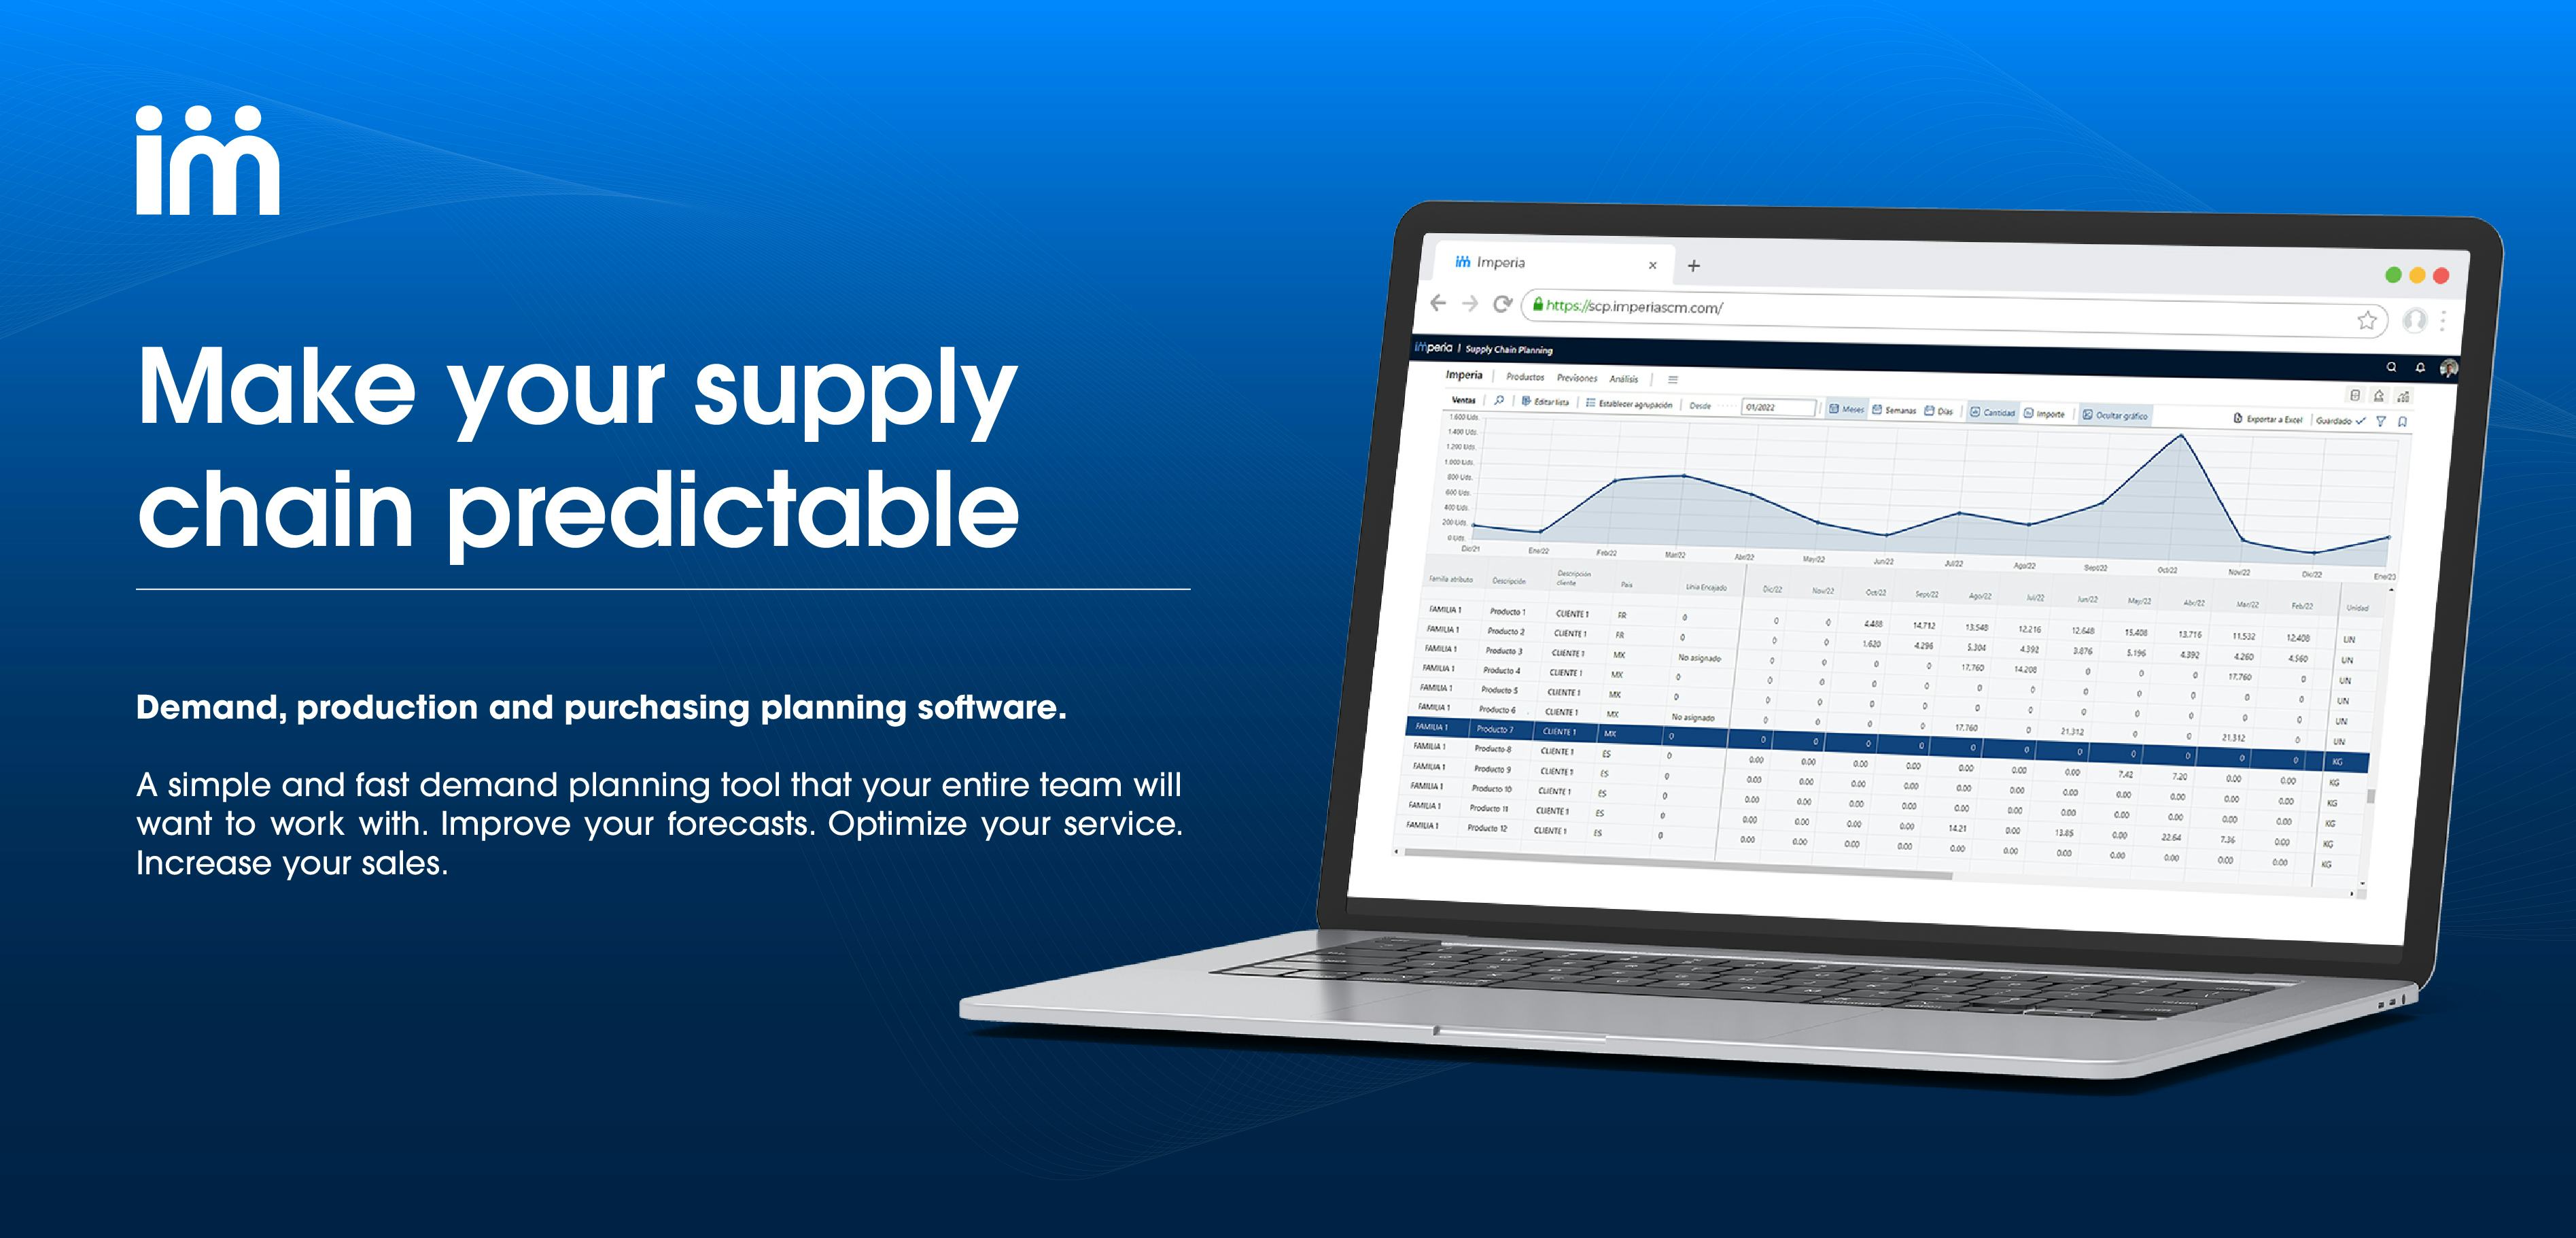 Imperia Software - Make your supply chain predictable: Demand, production and purchasing planning software. A simple and fast demand planning tool that your entire team will want to work with. Improve your forecasts. Optimize your service. Increase your sales.